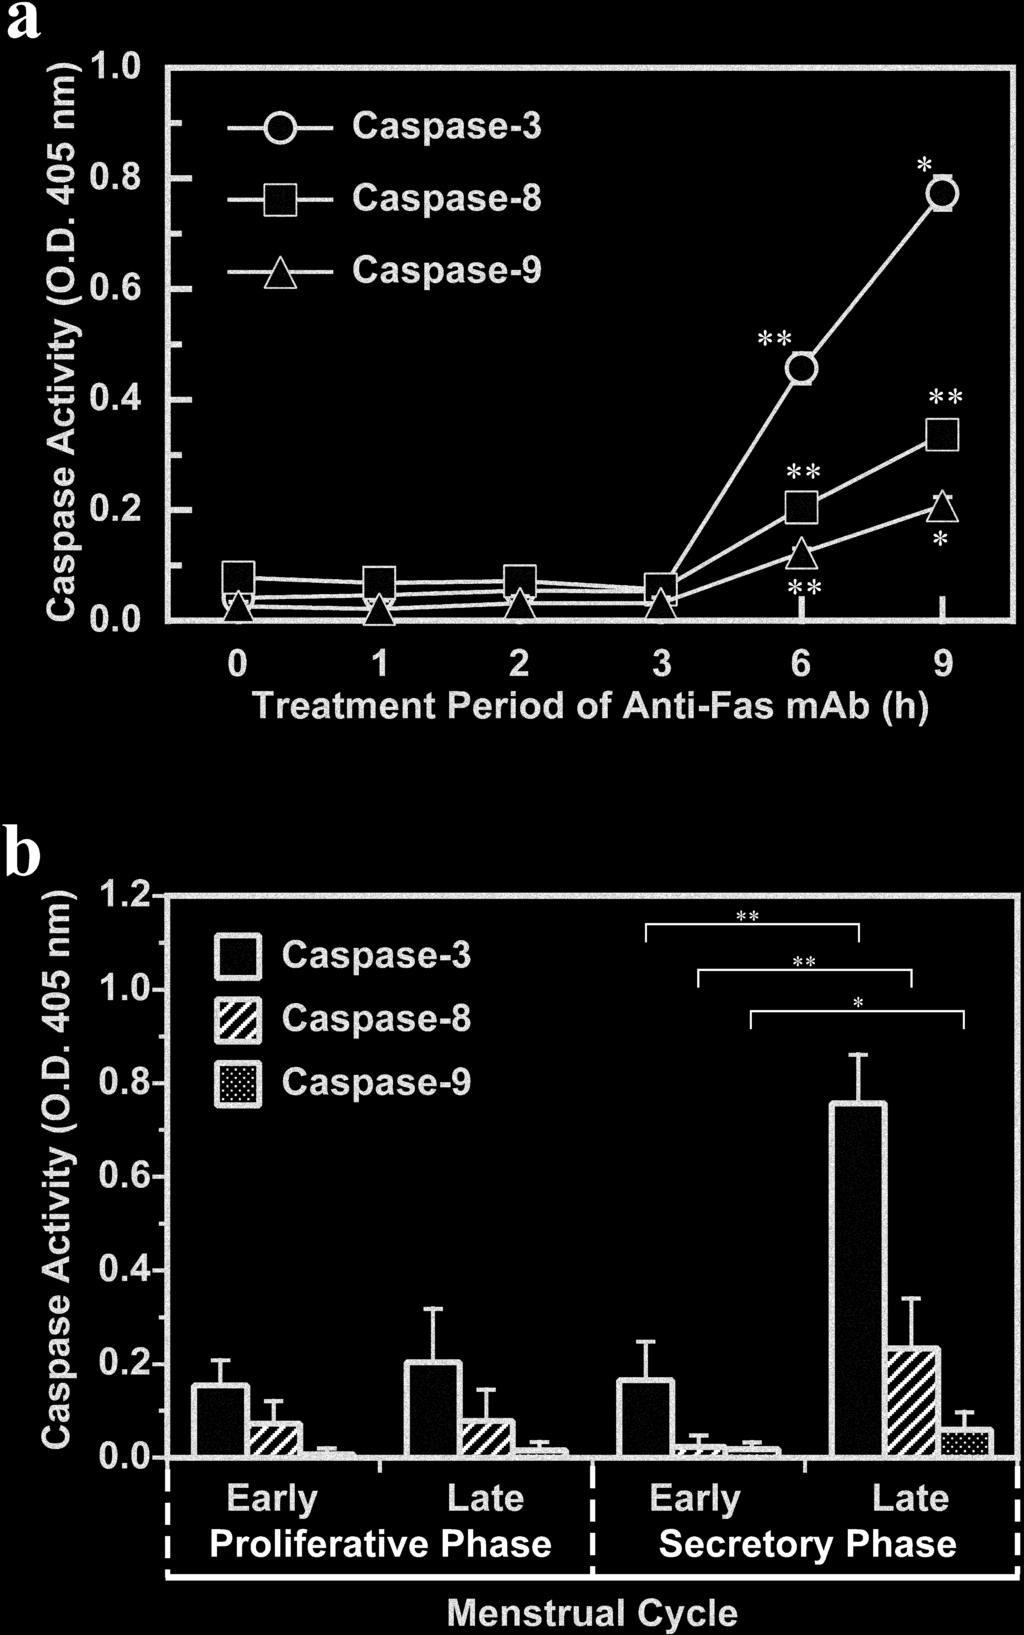 Cell viability was significantly decreased in HHUA cells treated with anti-fas mab in a dose-dependent manner (*P < 0.05; **P < 0.01). Data are indicated as the mean of three experiments.